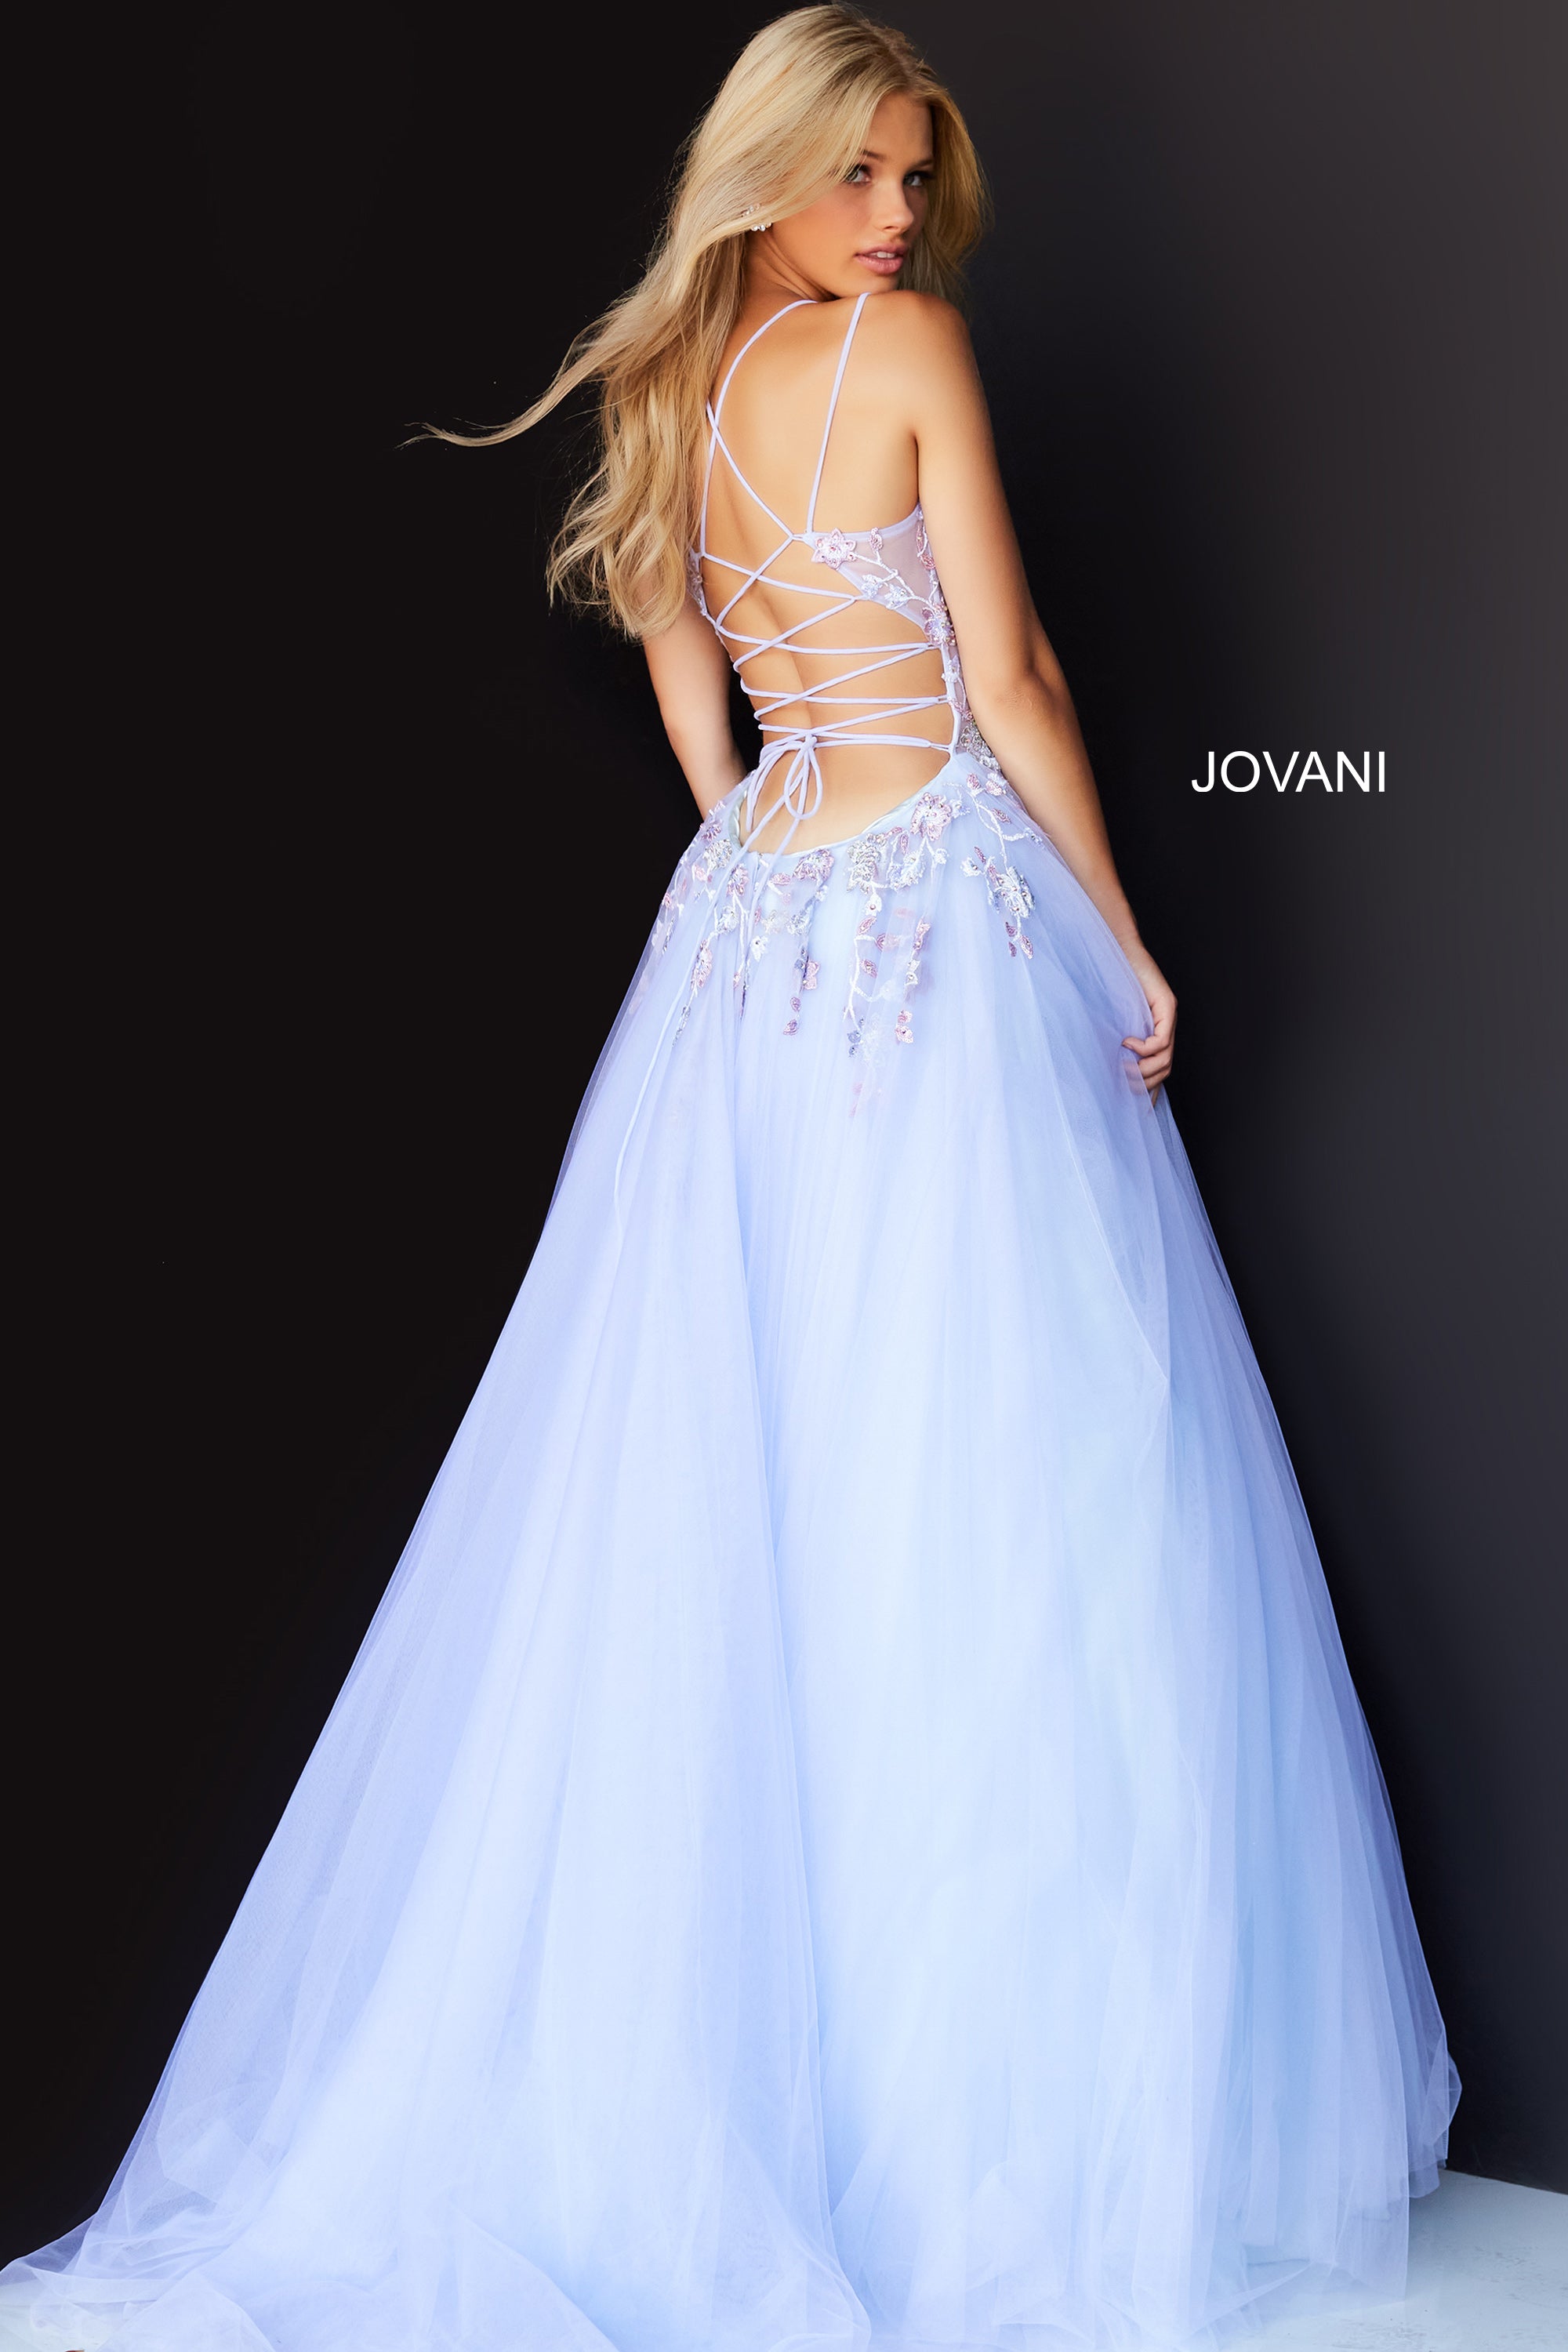 Floral Bodice Gorgeous Prom Ballgown By Jovani -06207